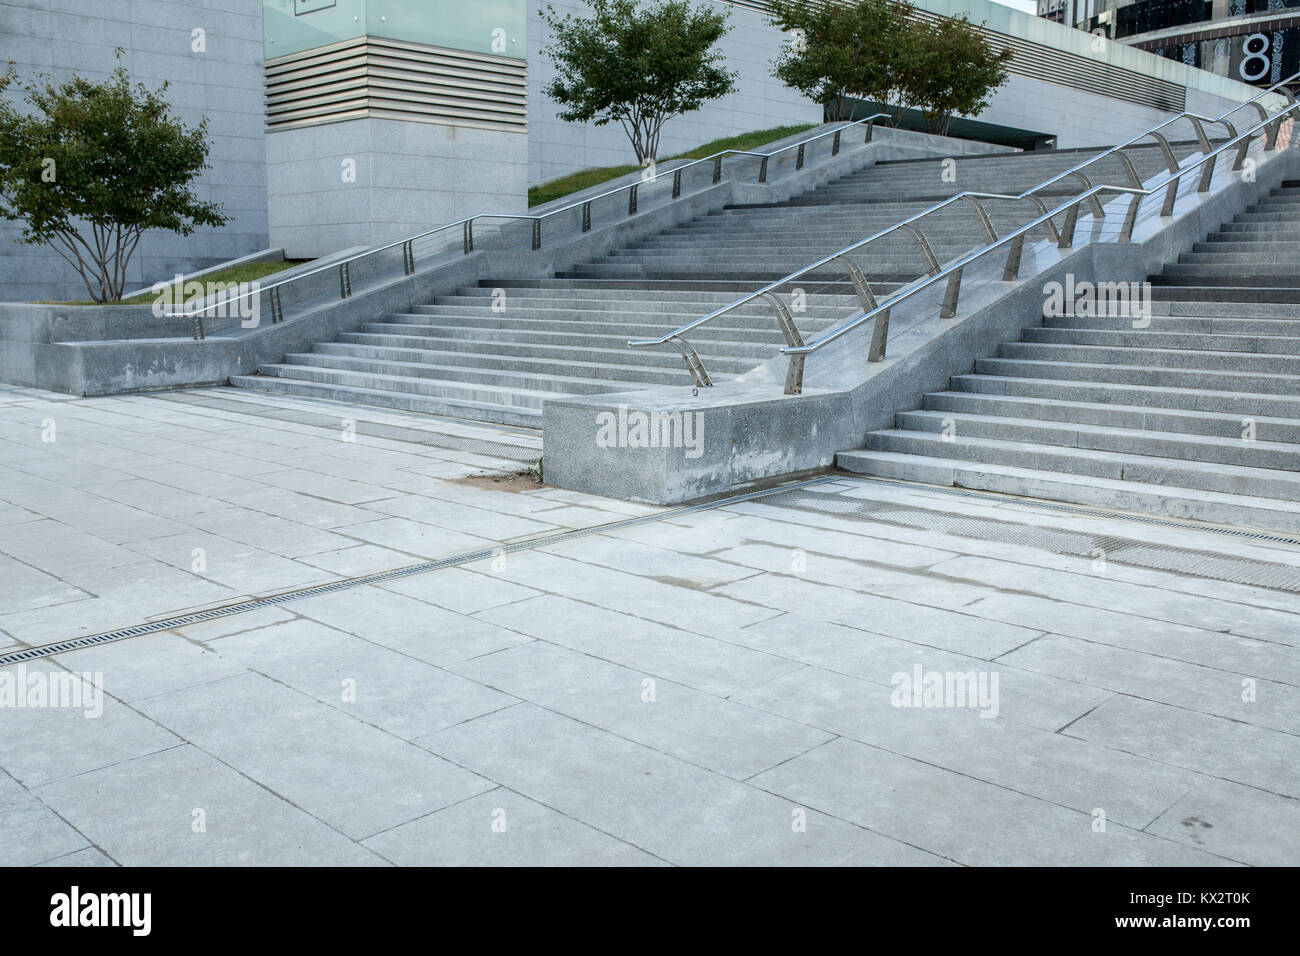 Urban modern building outdoor concrete cement steps outdoor town street Stock Photo